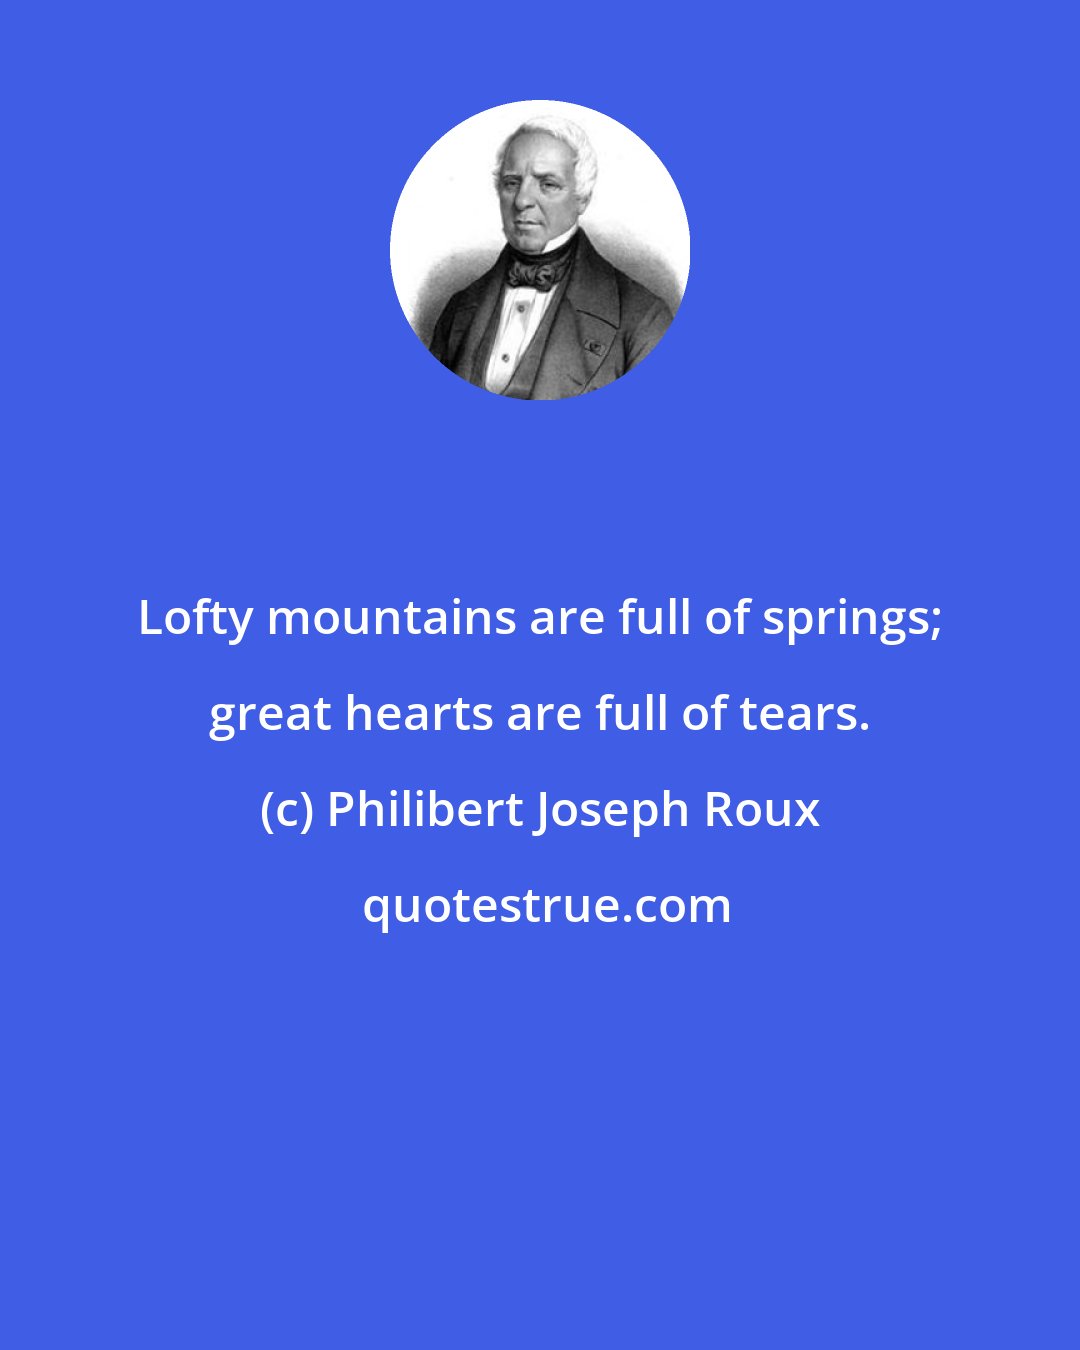 Philibert Joseph Roux: Lofty mountains are full of springs; great hearts are full of tears.